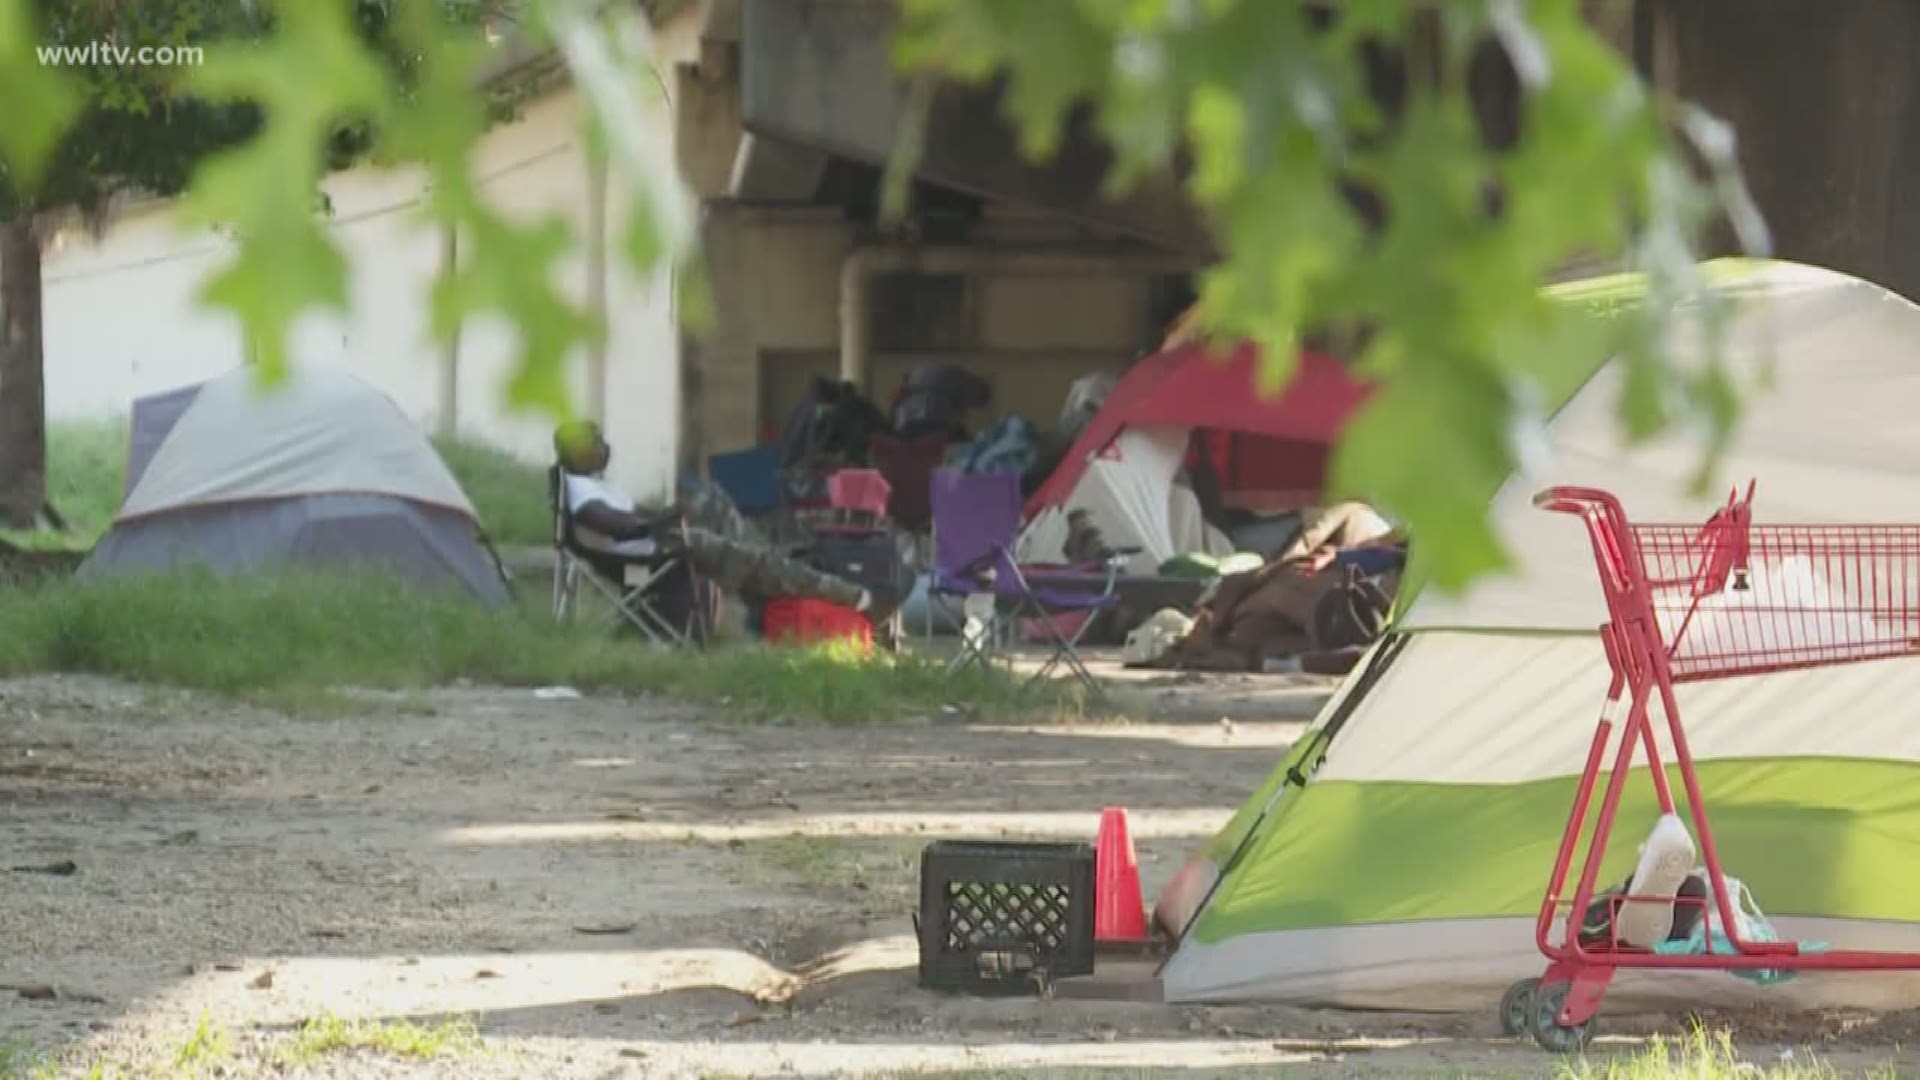 Charity organizations say the homeless population is growing faster than they can help them get off the streets.